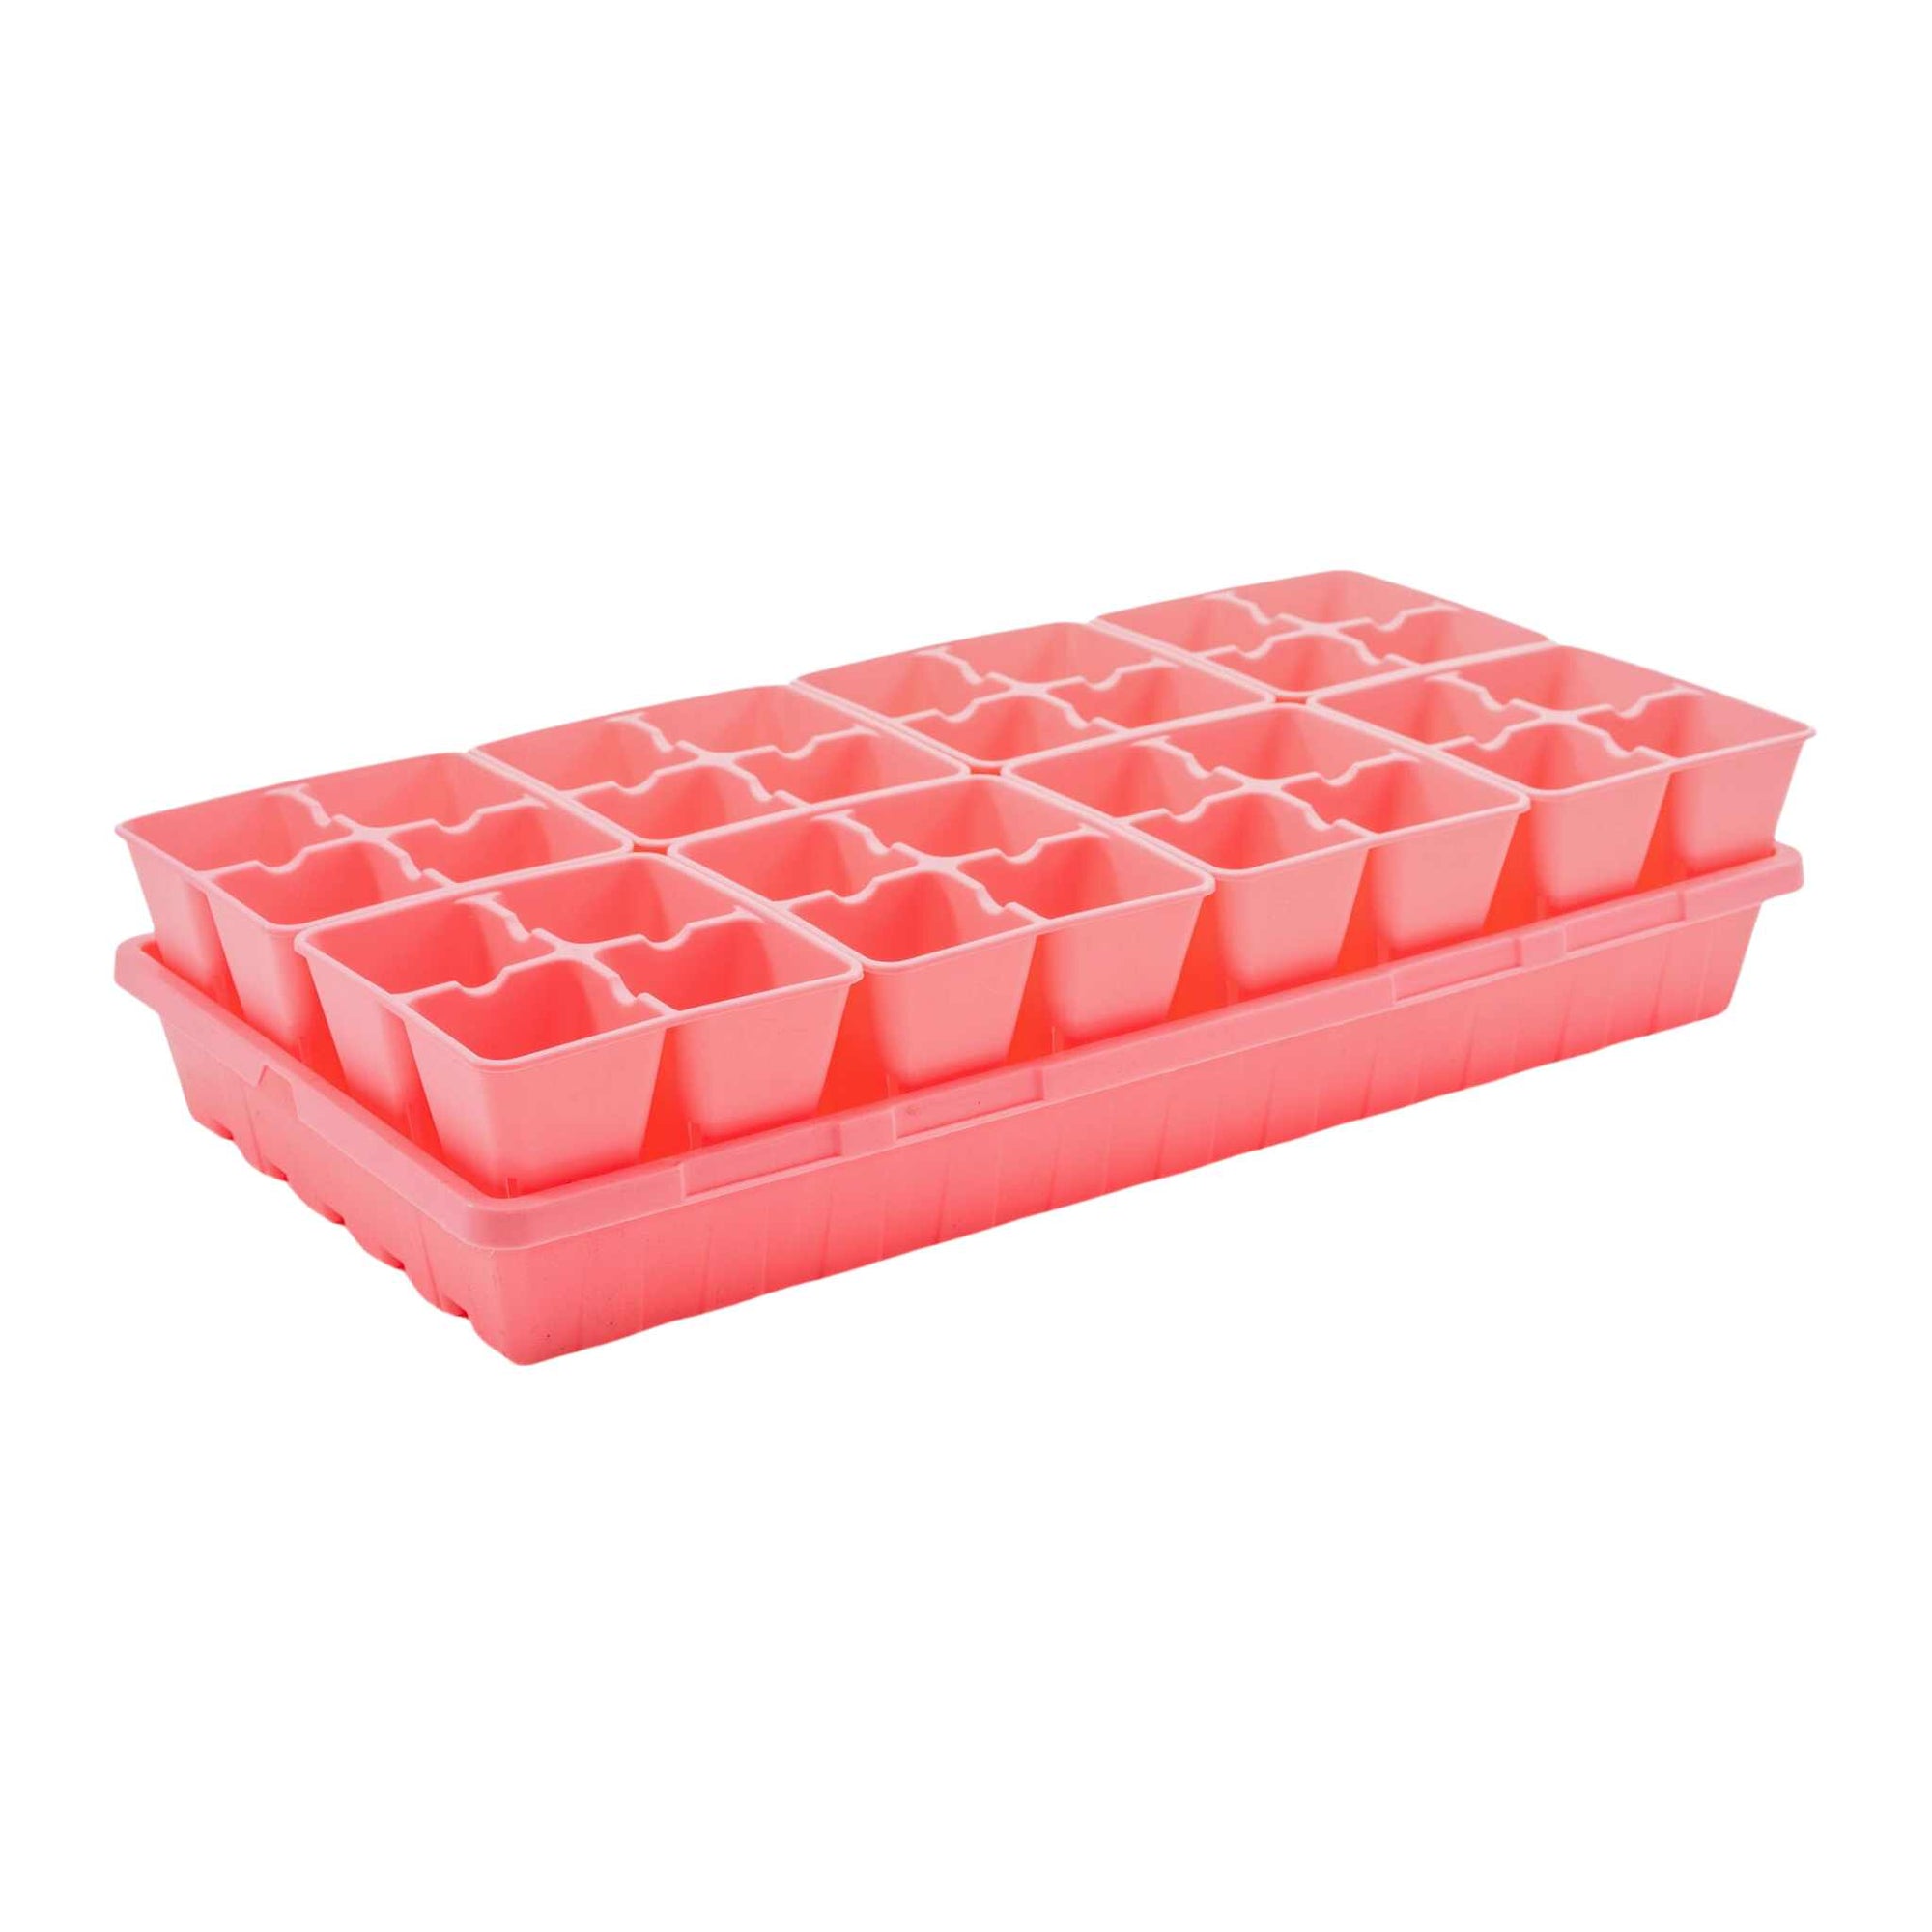 8 4 cell plug trays within a 1020 pink tray